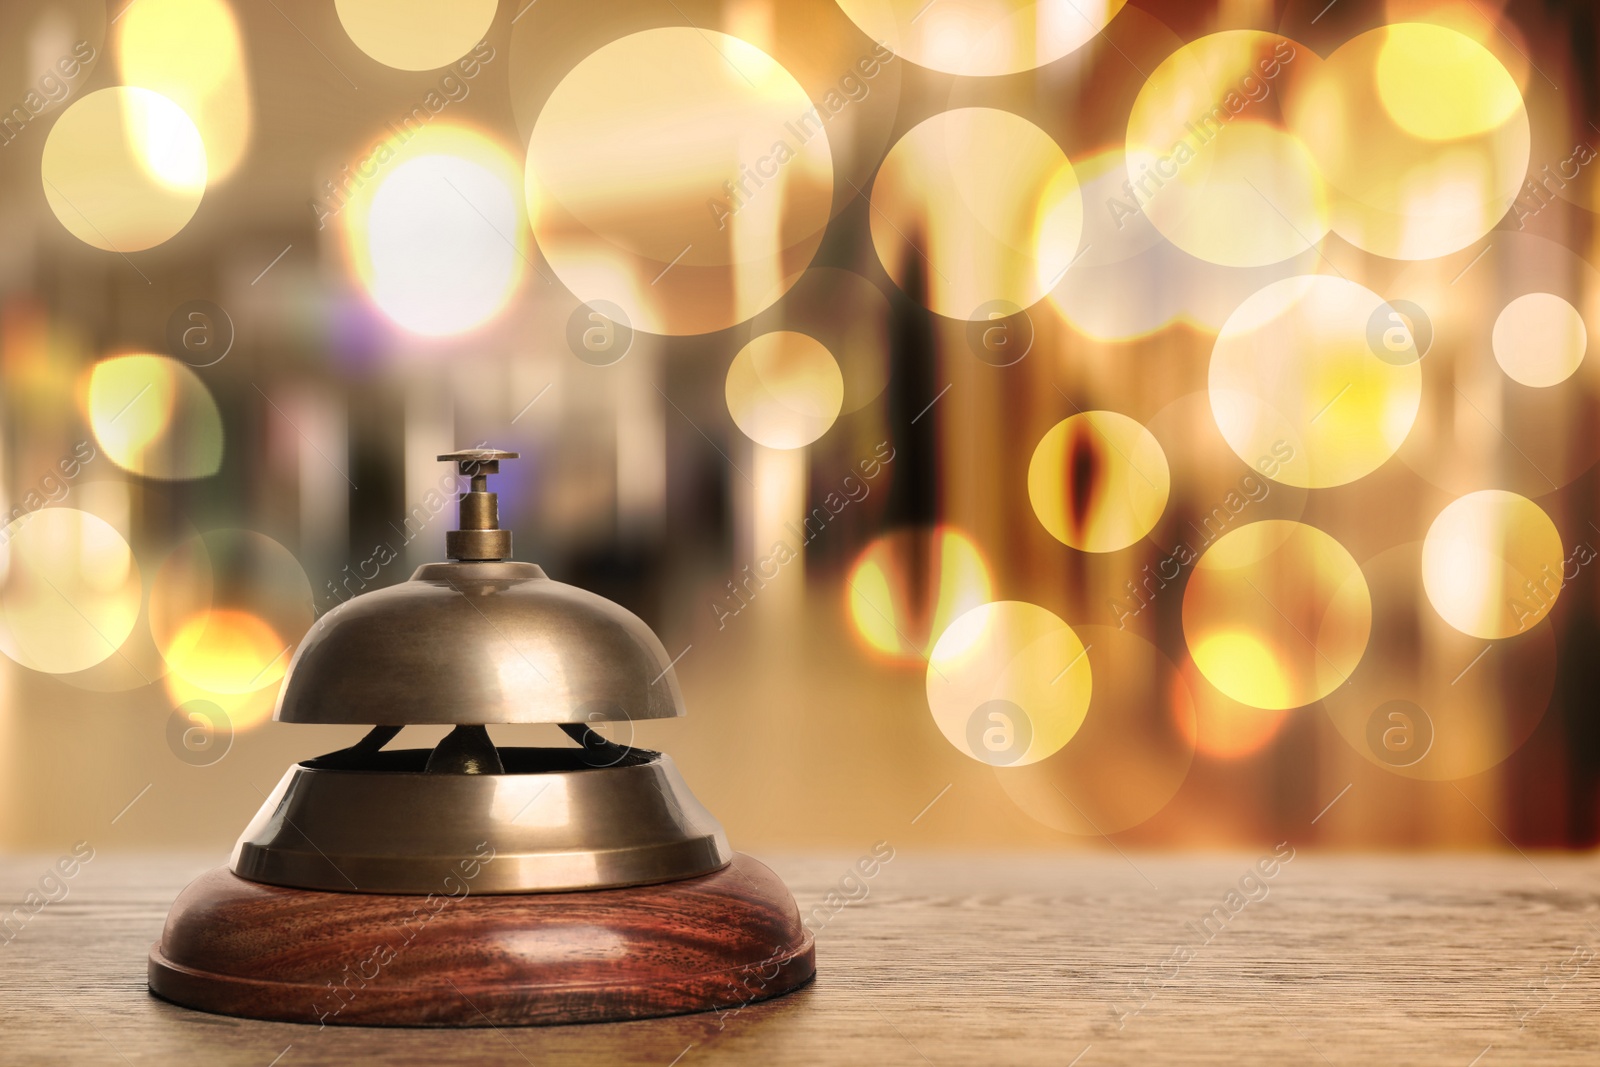 Image of Wooden table with hotel service bell on blurred background. Space for text